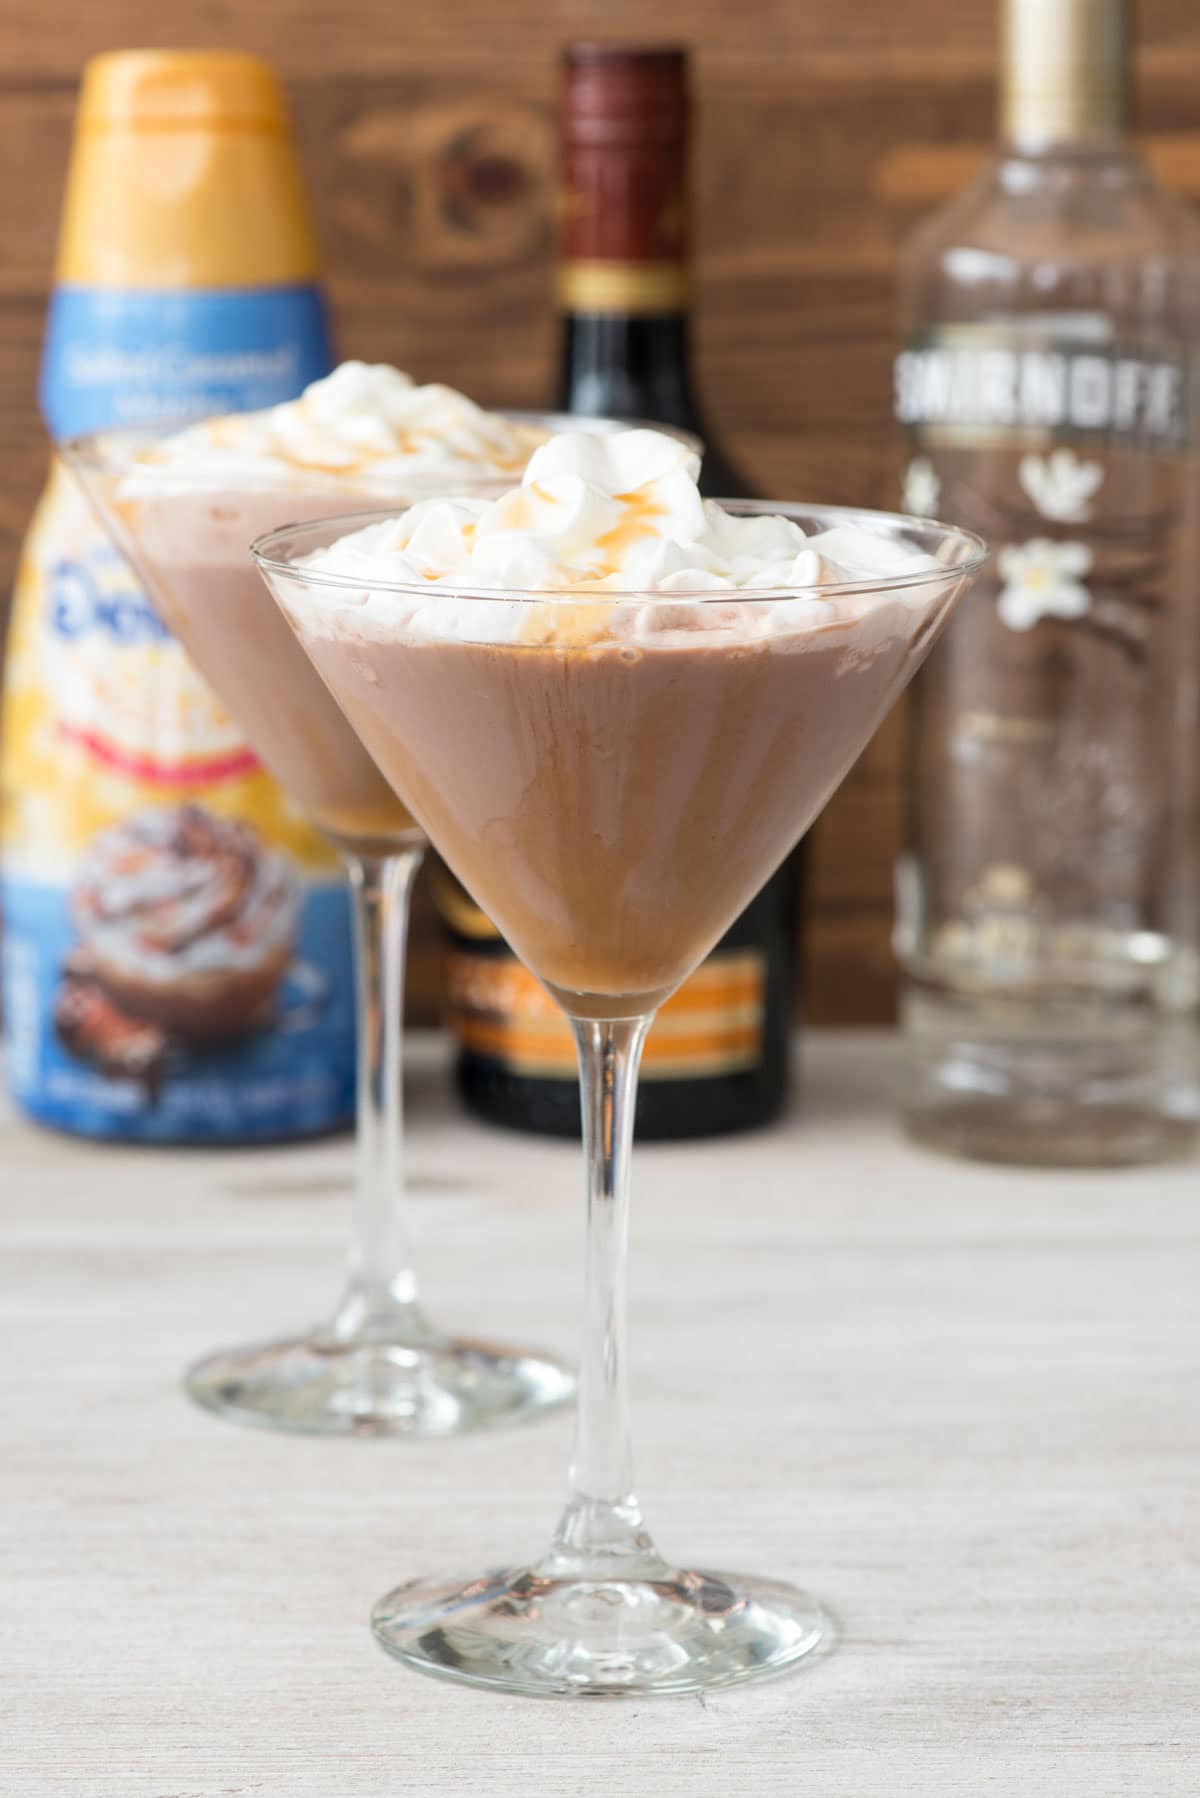 Salted Caramel Mocha Martini - just a few ingredients to the BEST martini recipe!